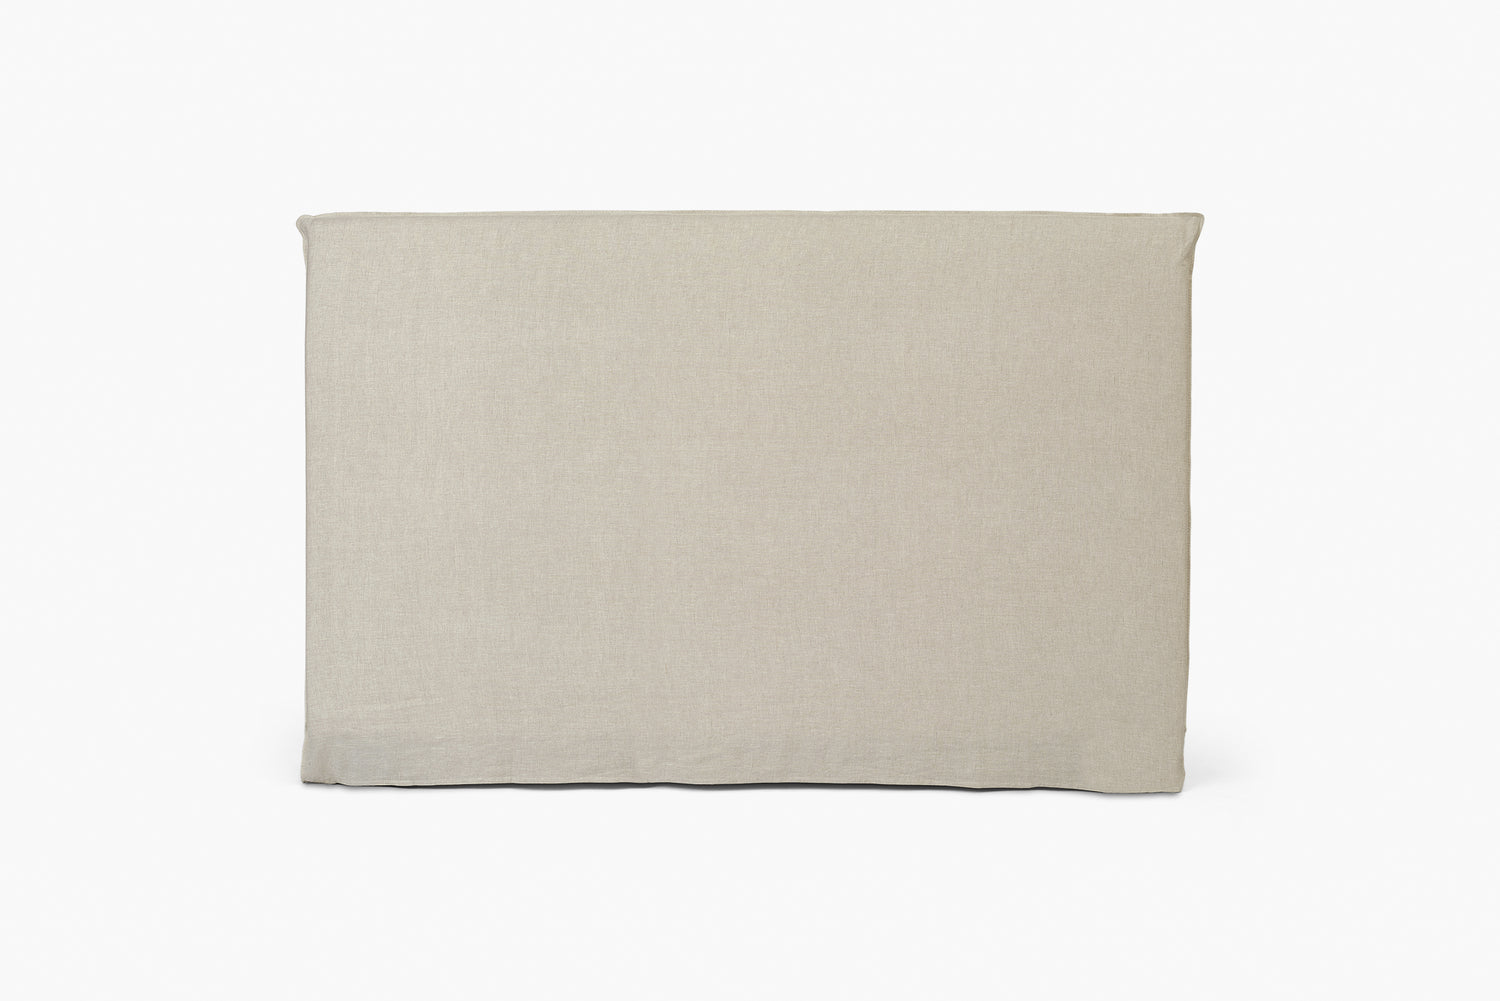 Joe Low Bedhead Cover - French Linen